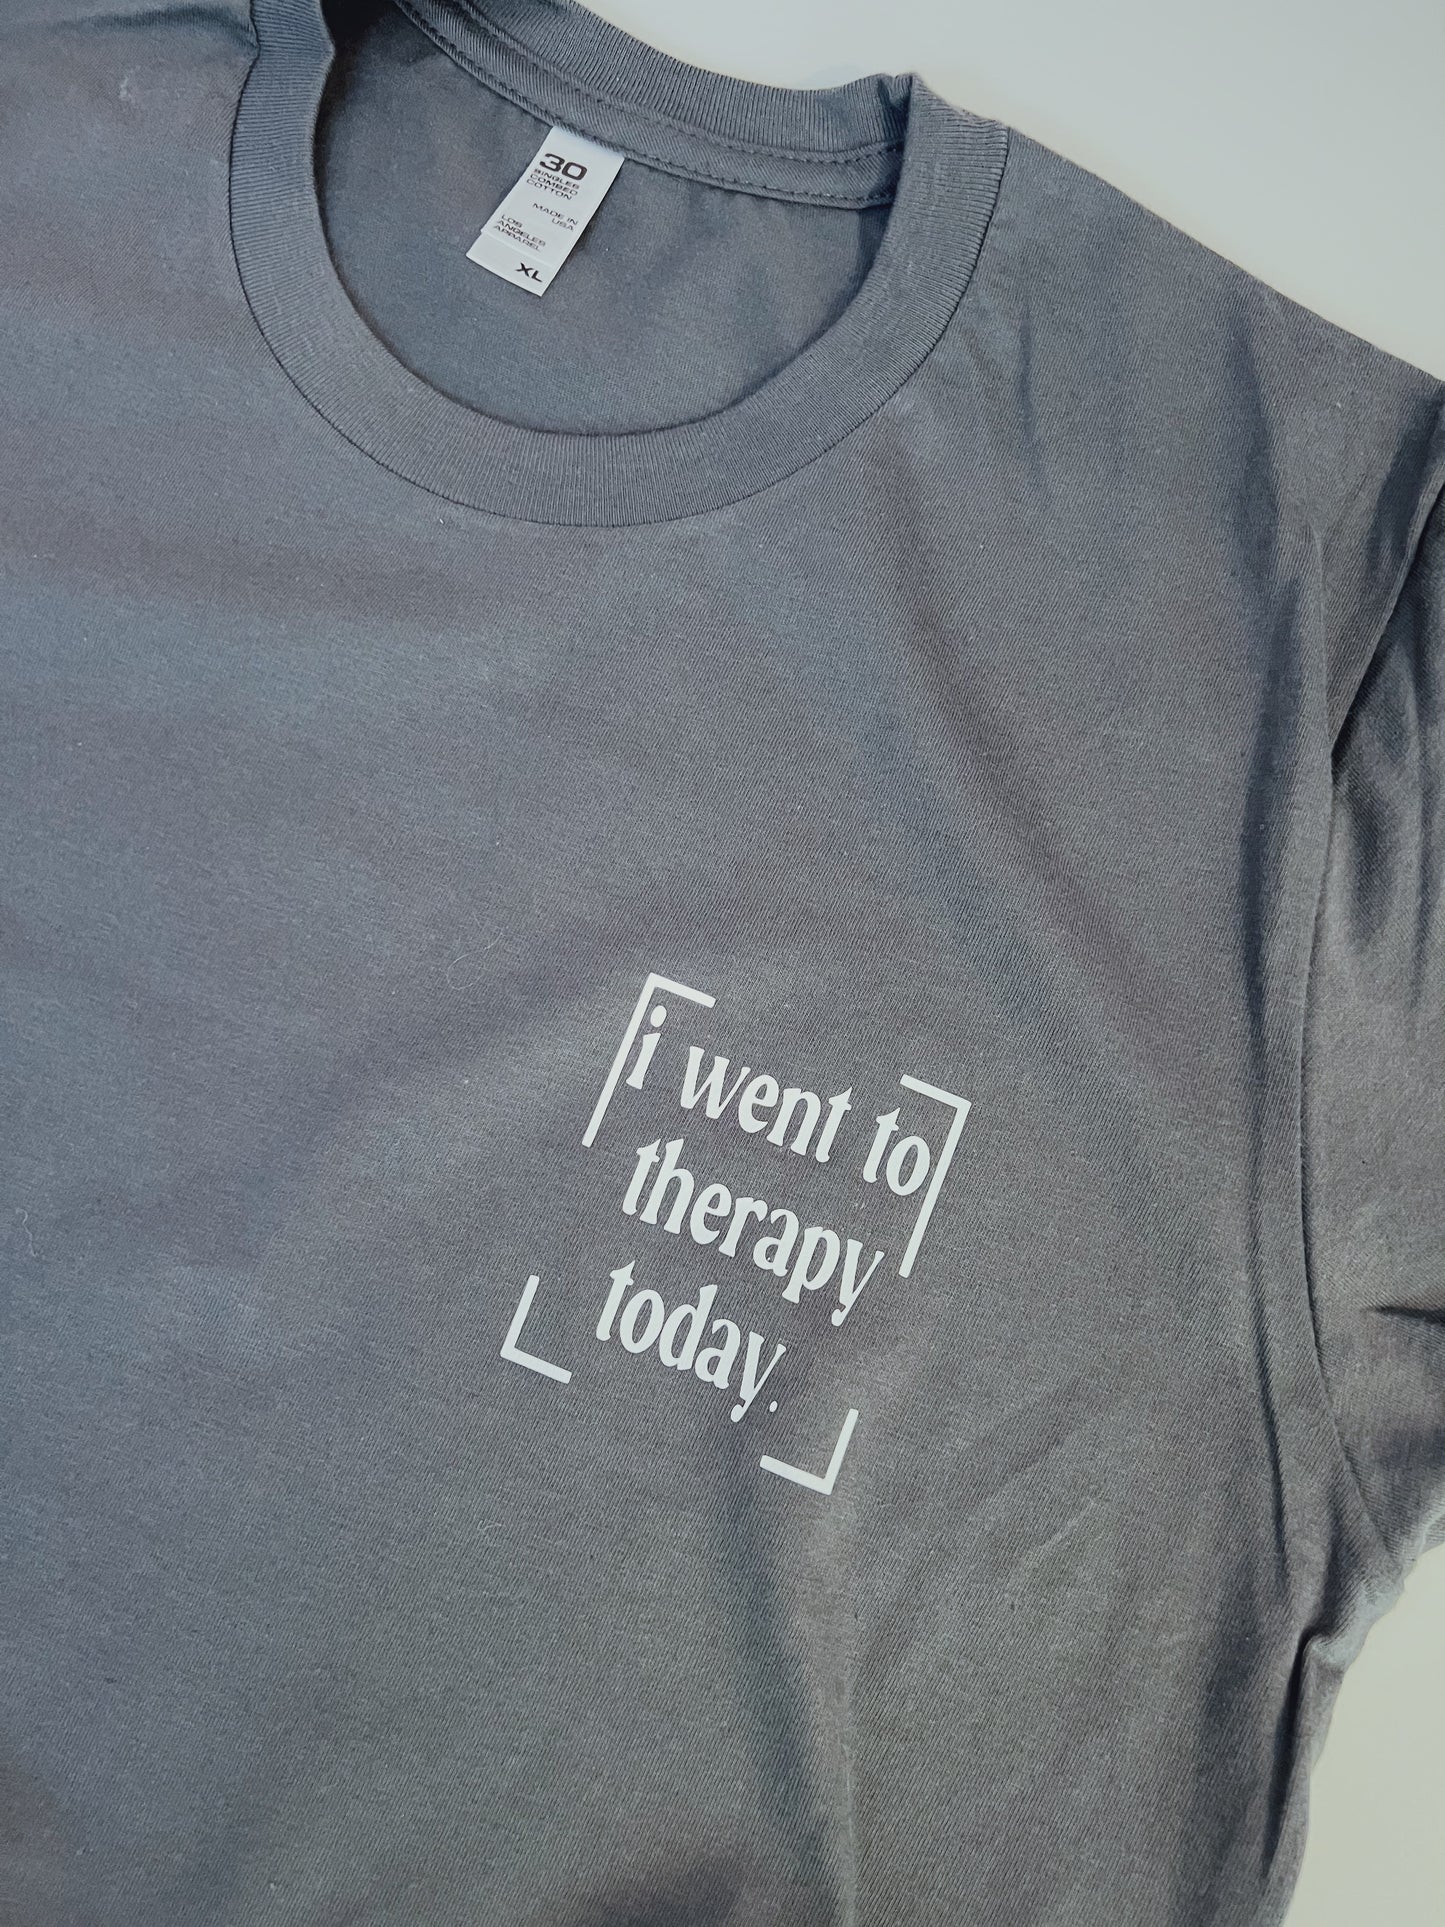 I WENT TO THERAPY TODAY crop tshirt